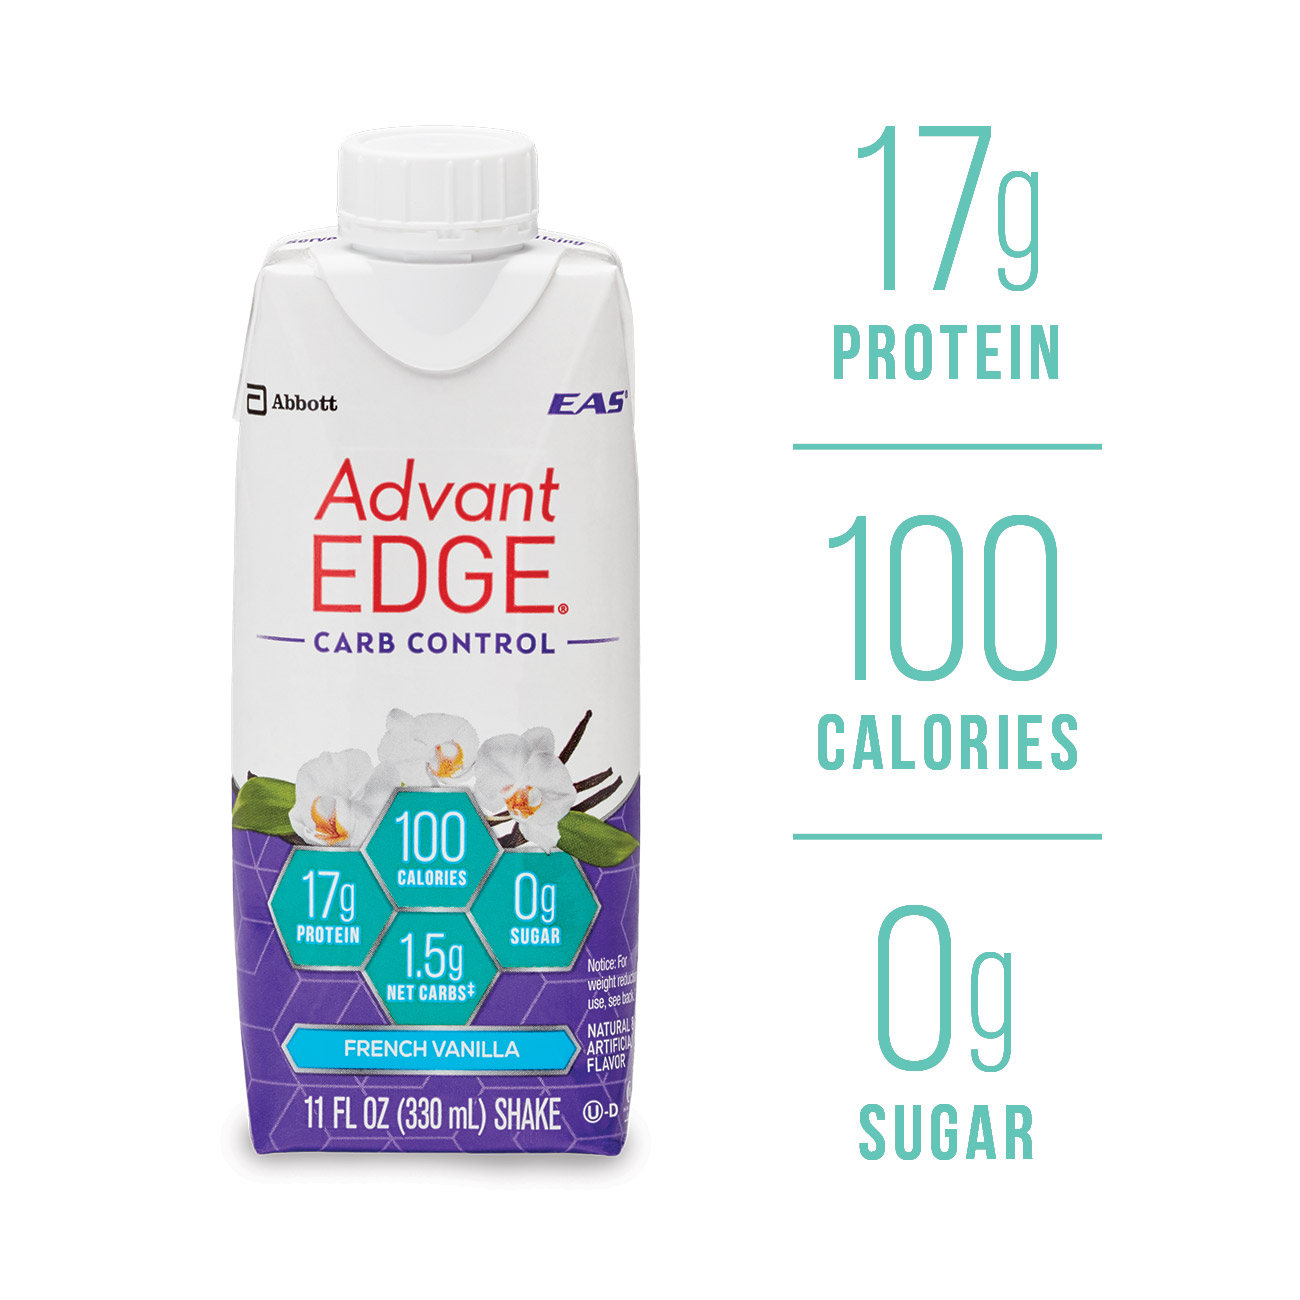 EAS AdvantEDGE Carb Control Protein Shake, French Vanilla, 17g Protein, 4 Ct - image 2 of 13